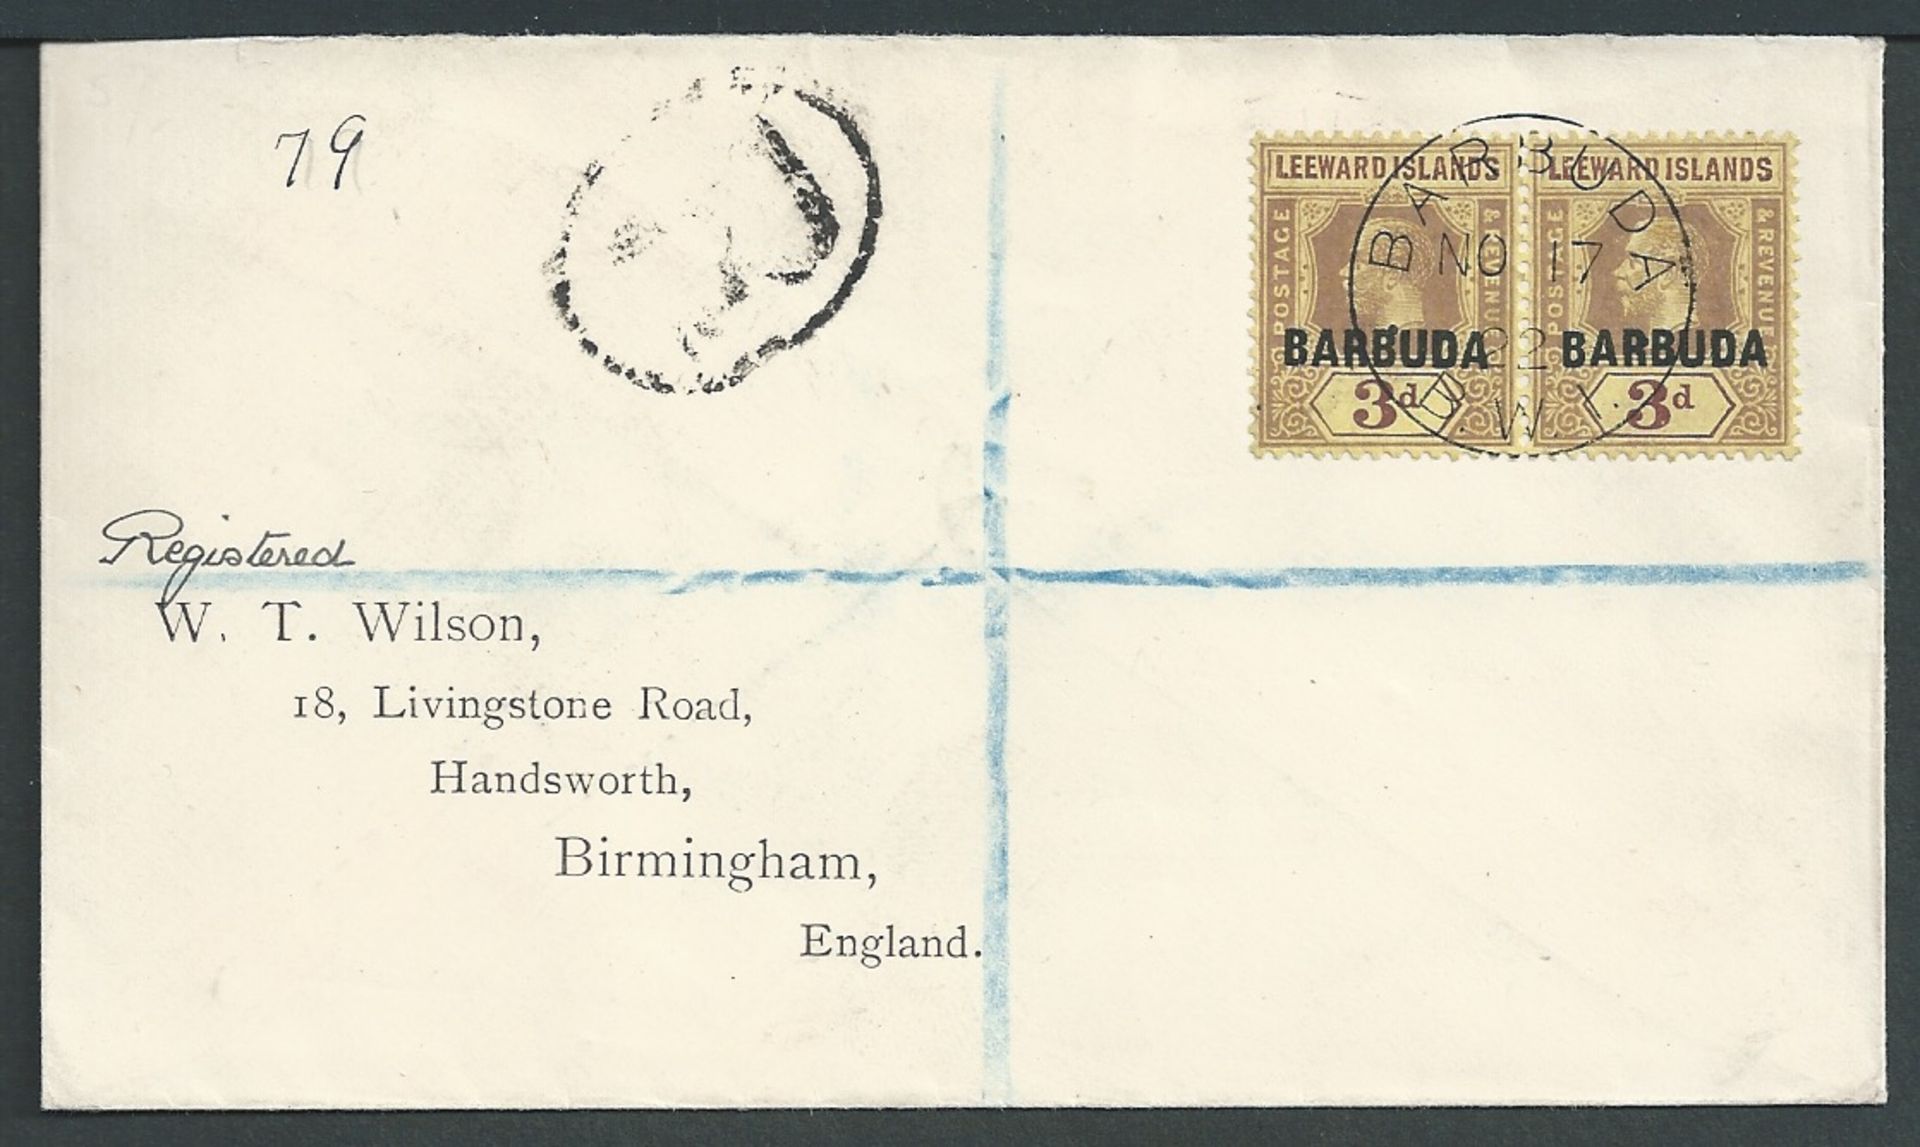 Barbuda 1922 Registered Cover to England, bearing first issue 3d pair